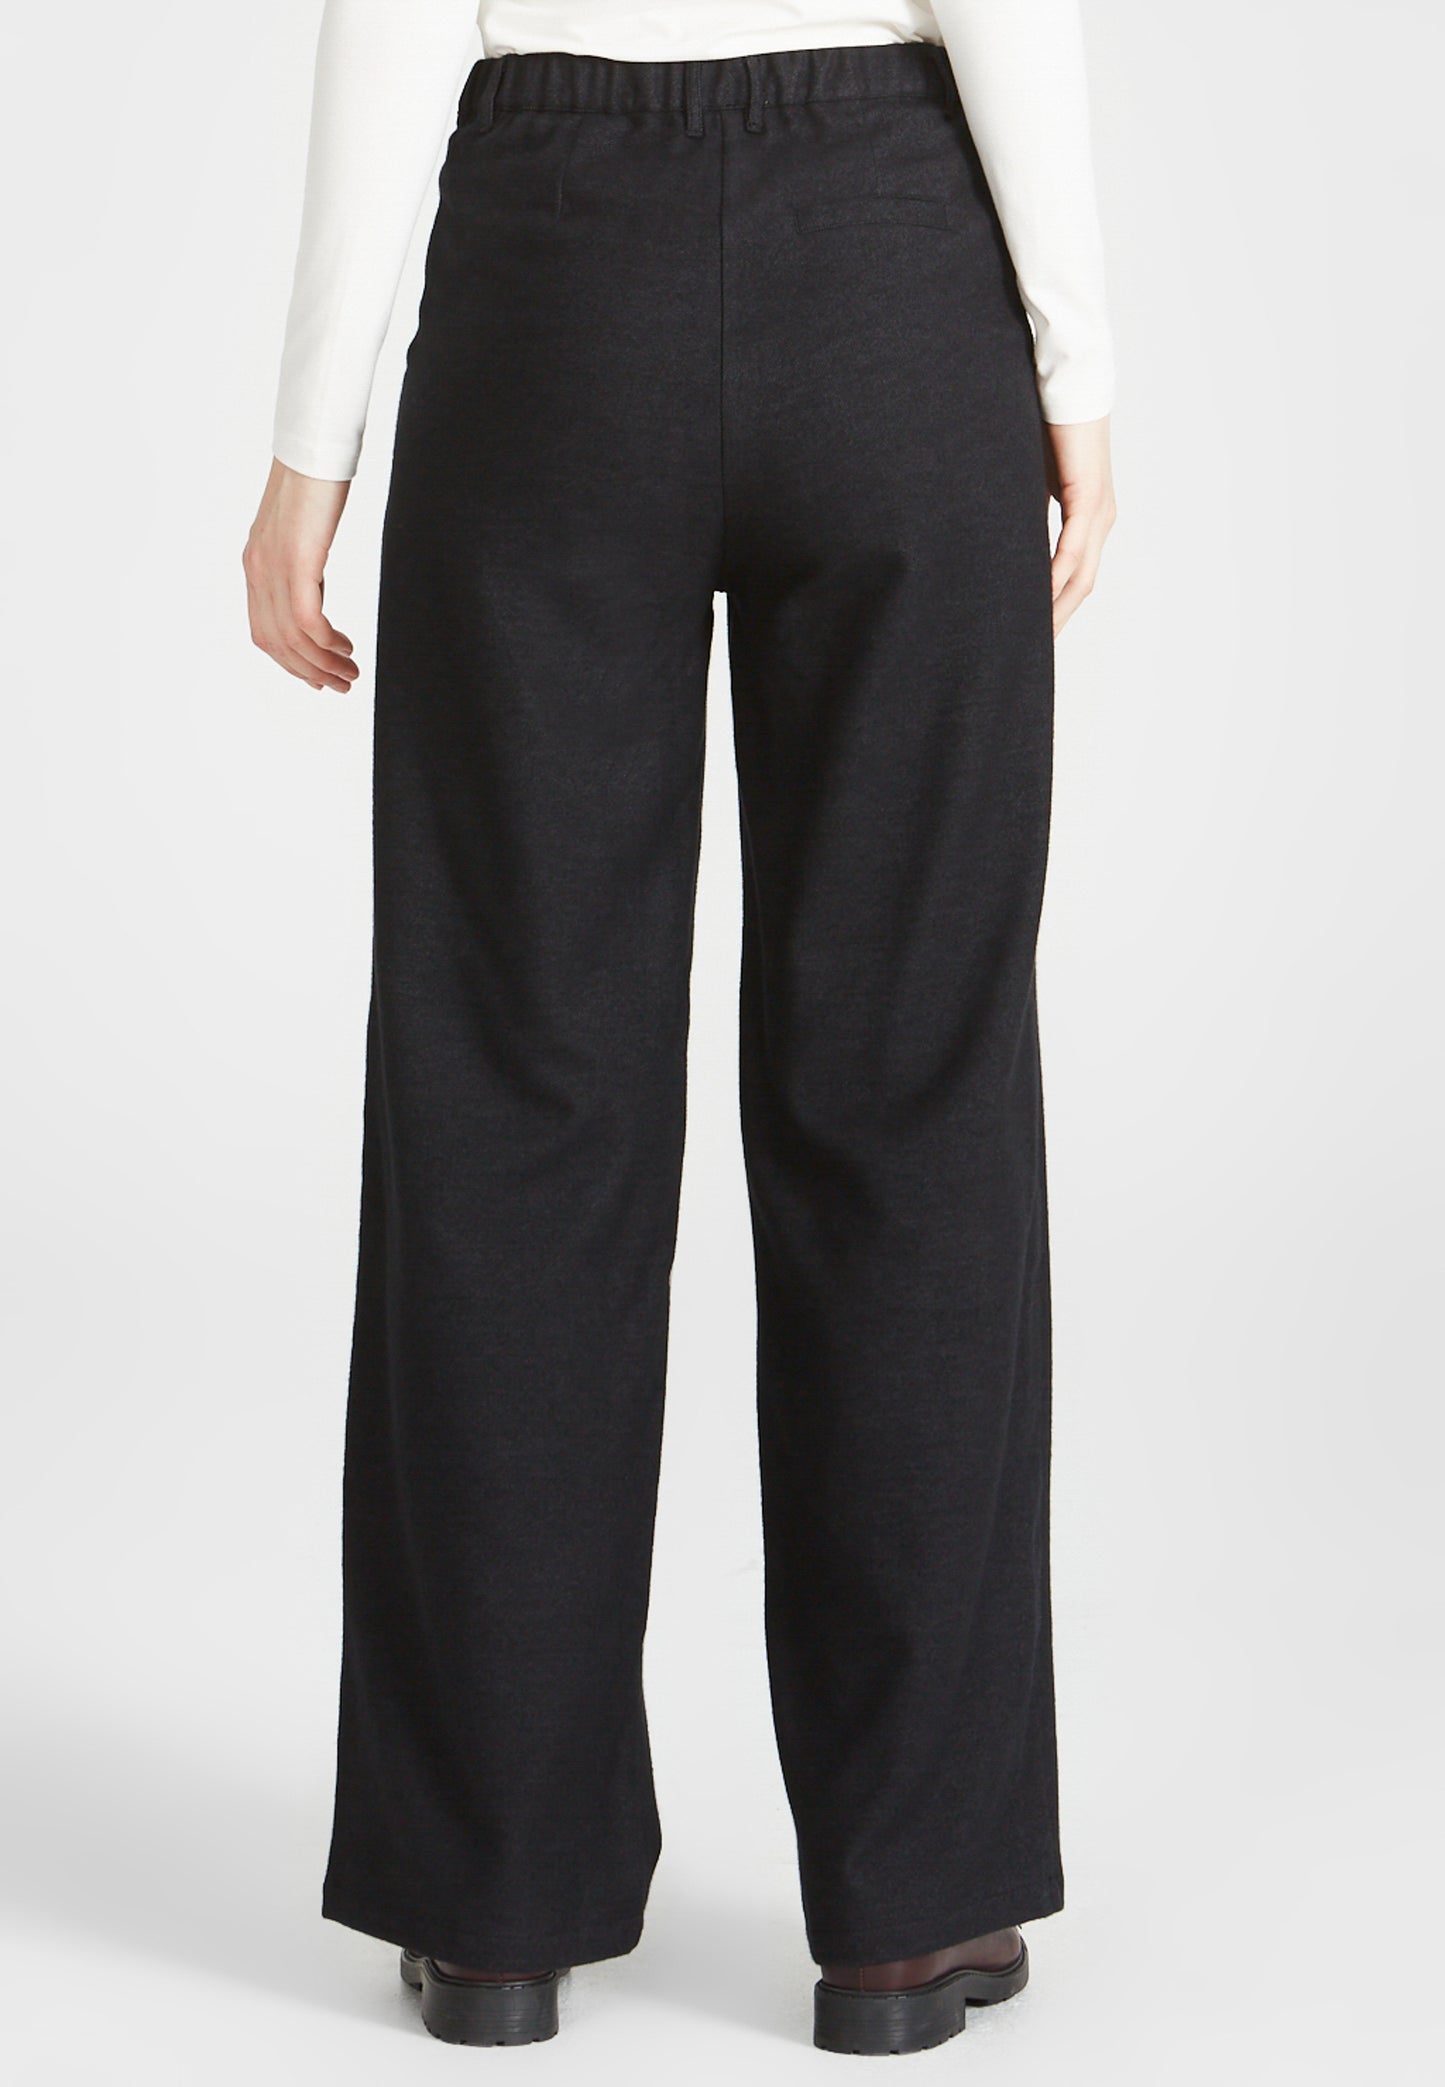 Givn - Beatrice Trousers Anthracite